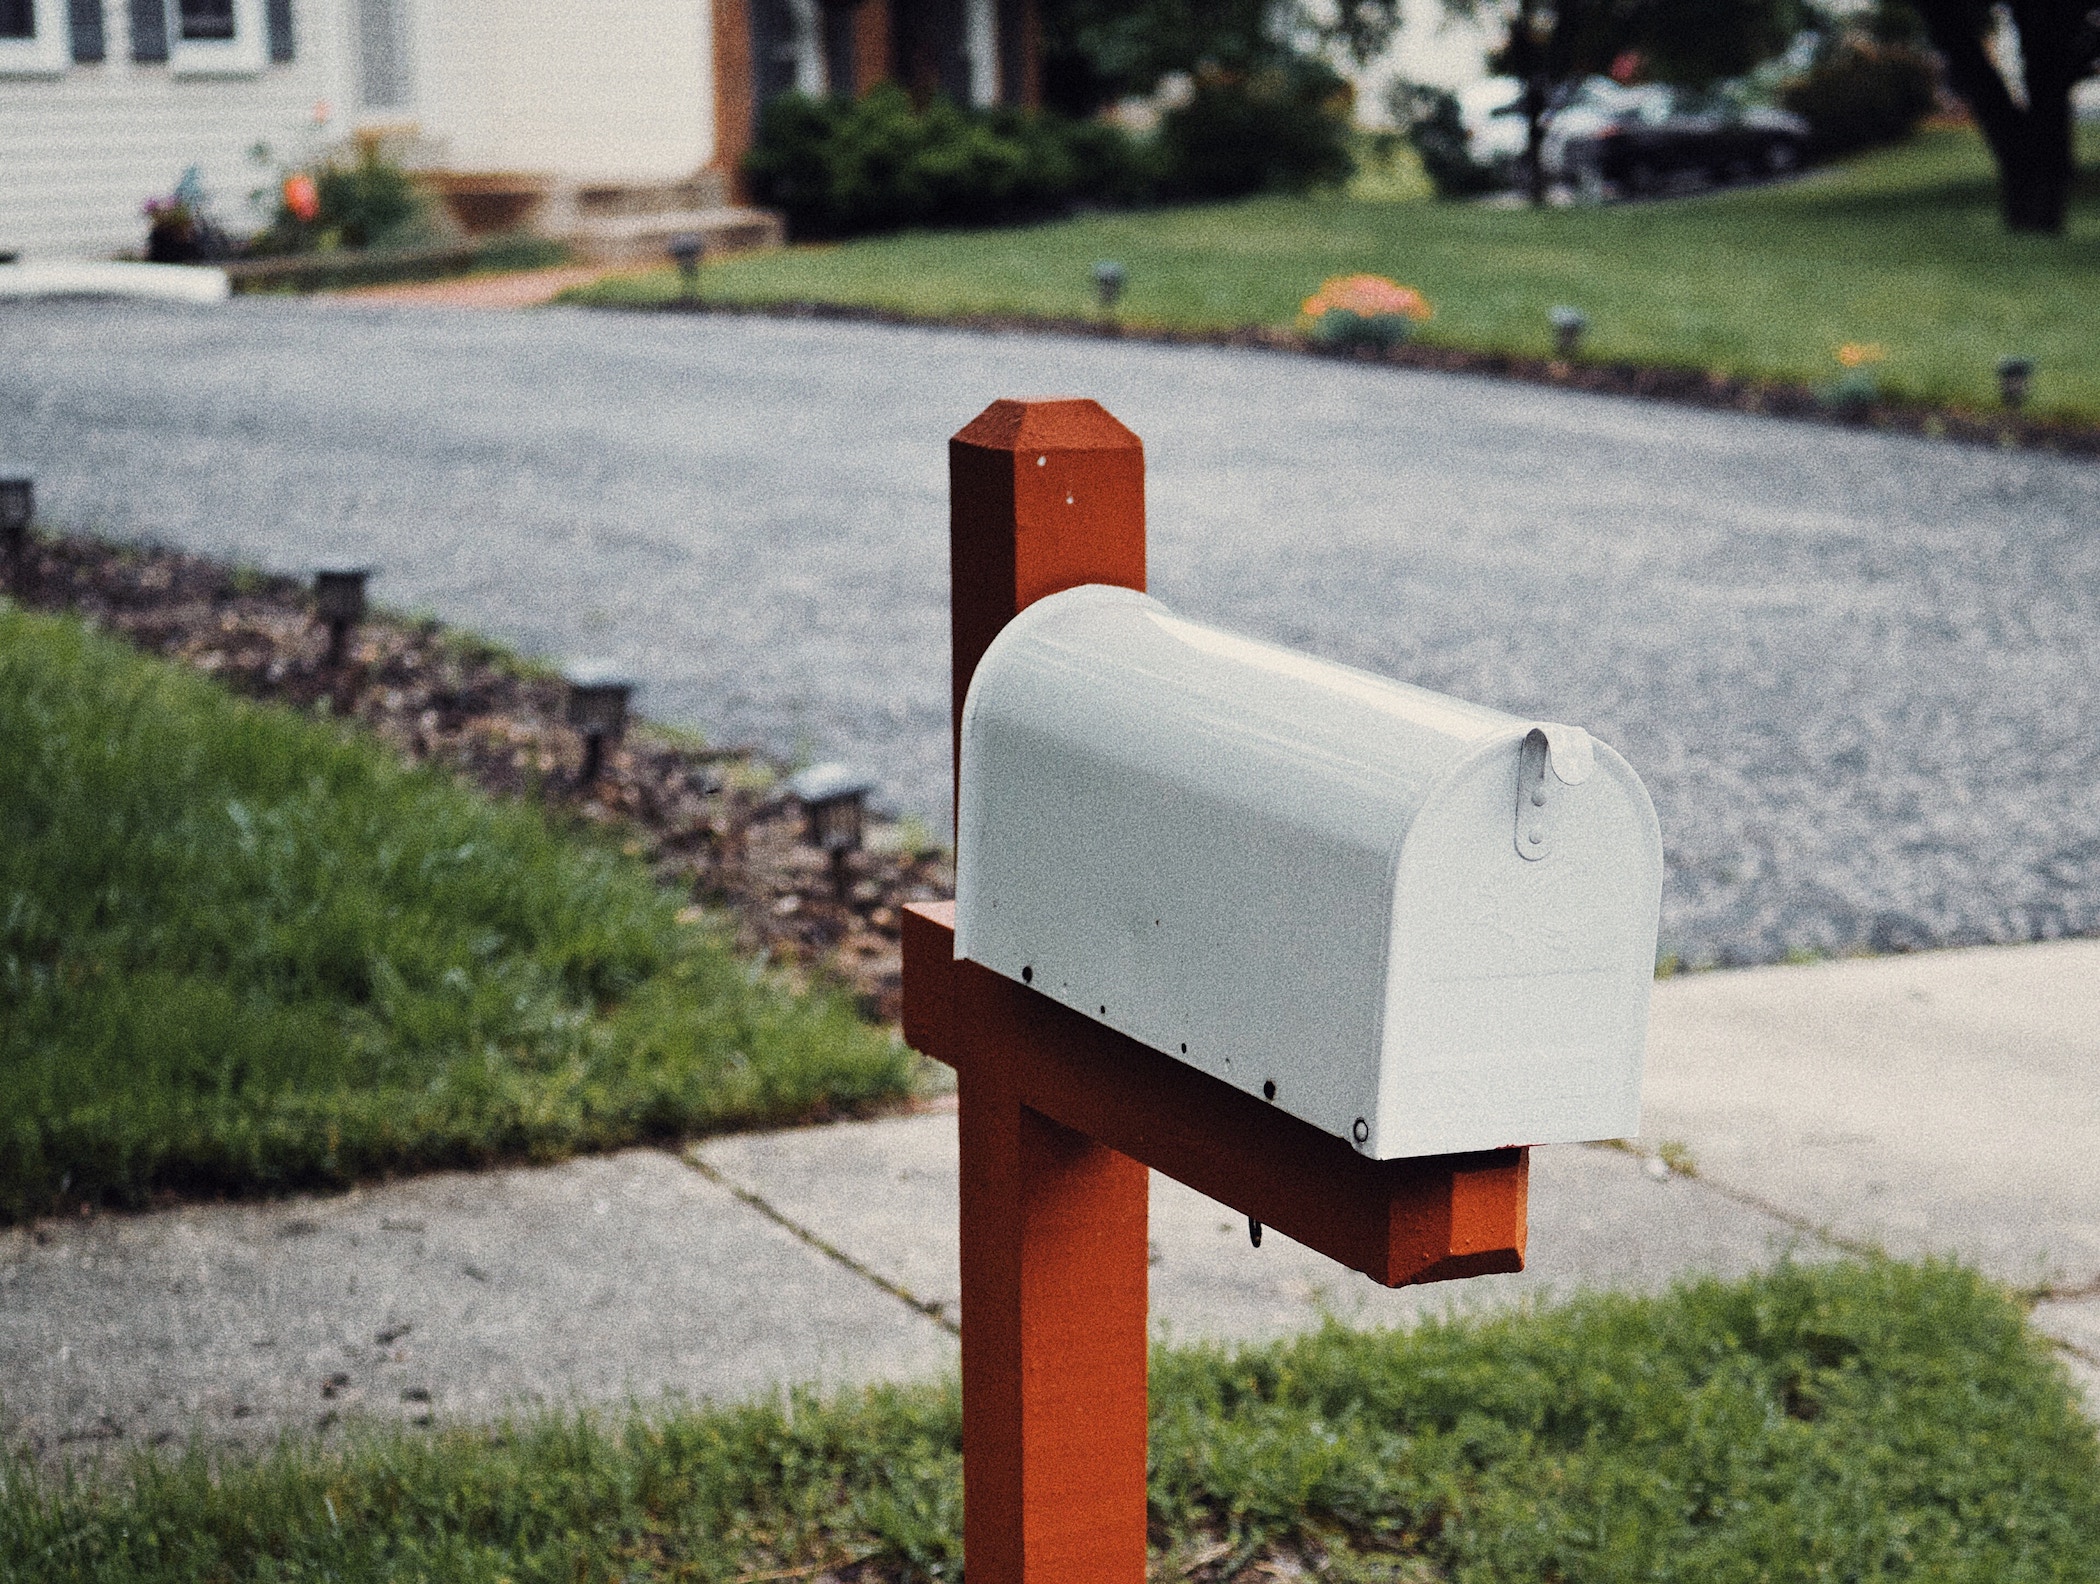 Mailbox in front of single-family home